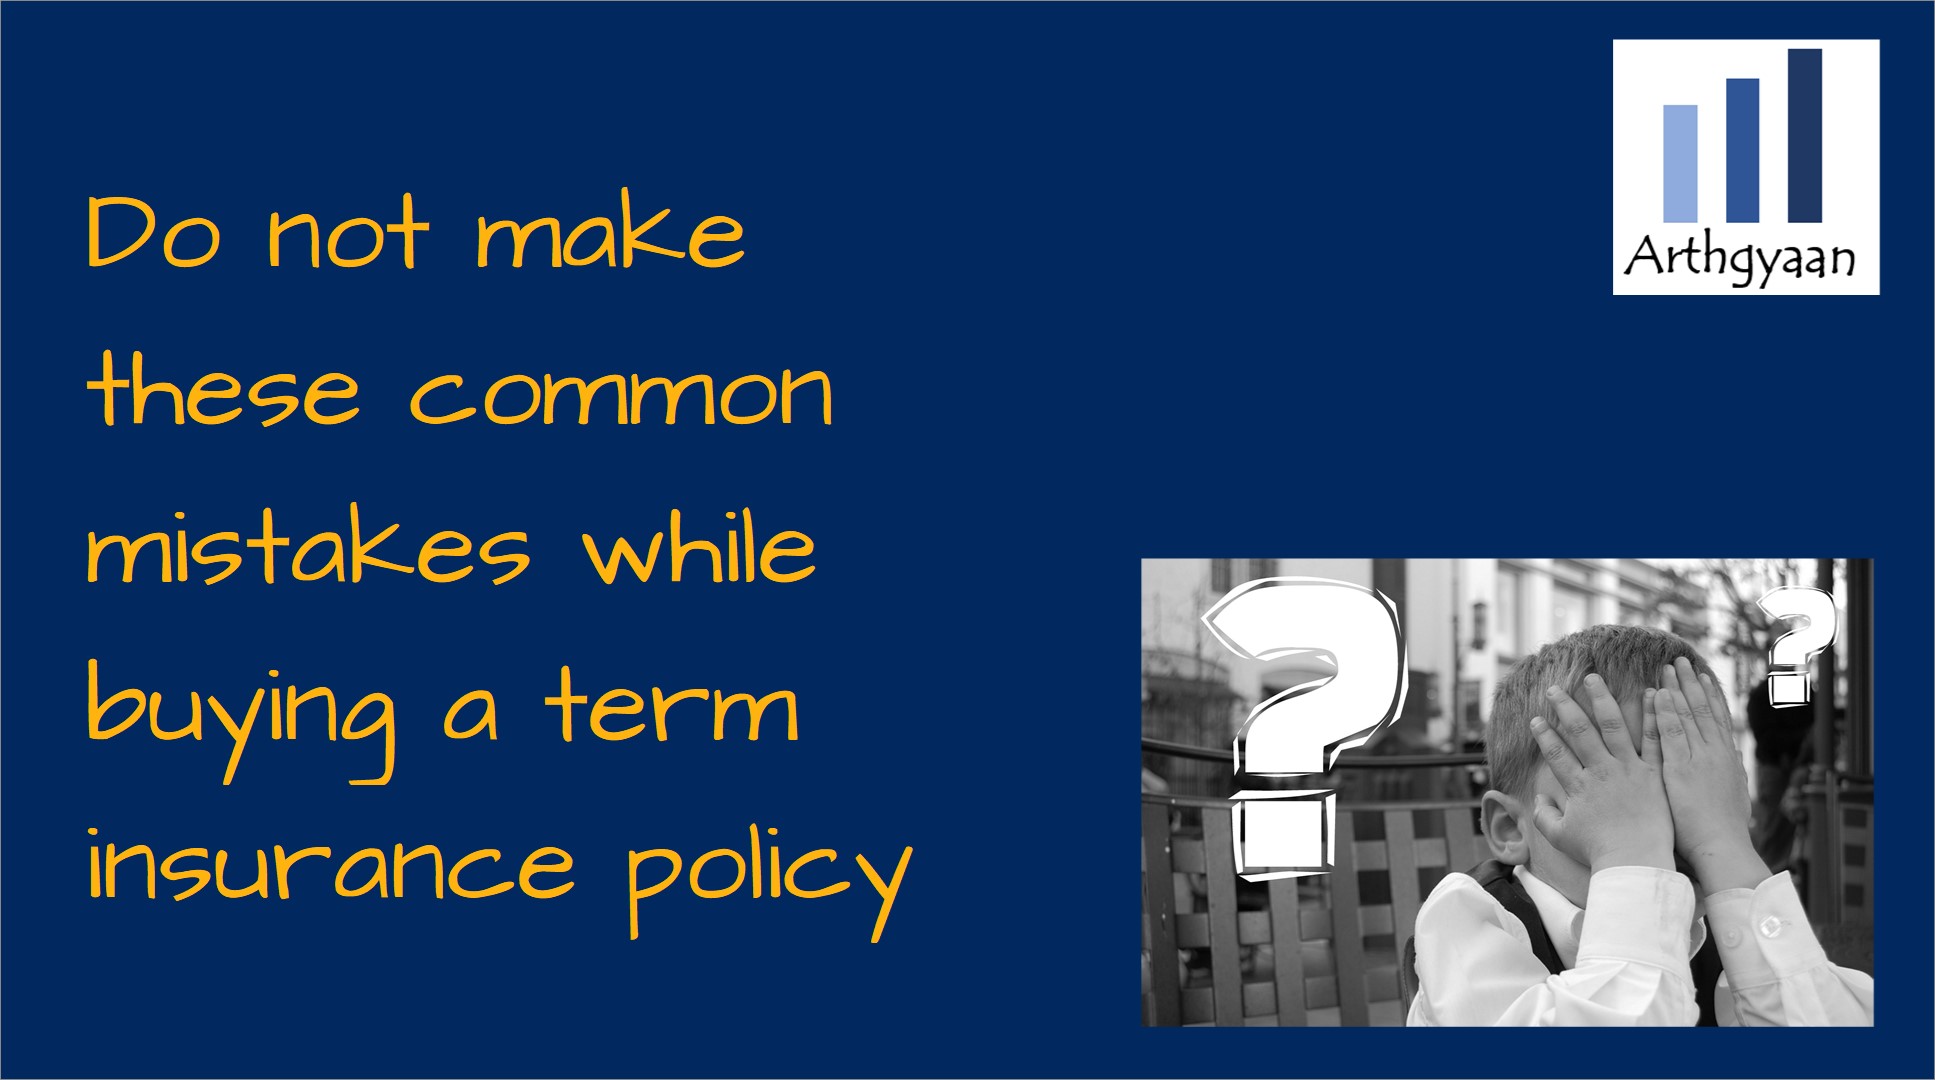 Do not make these common mistakes while buying a term insurance policy